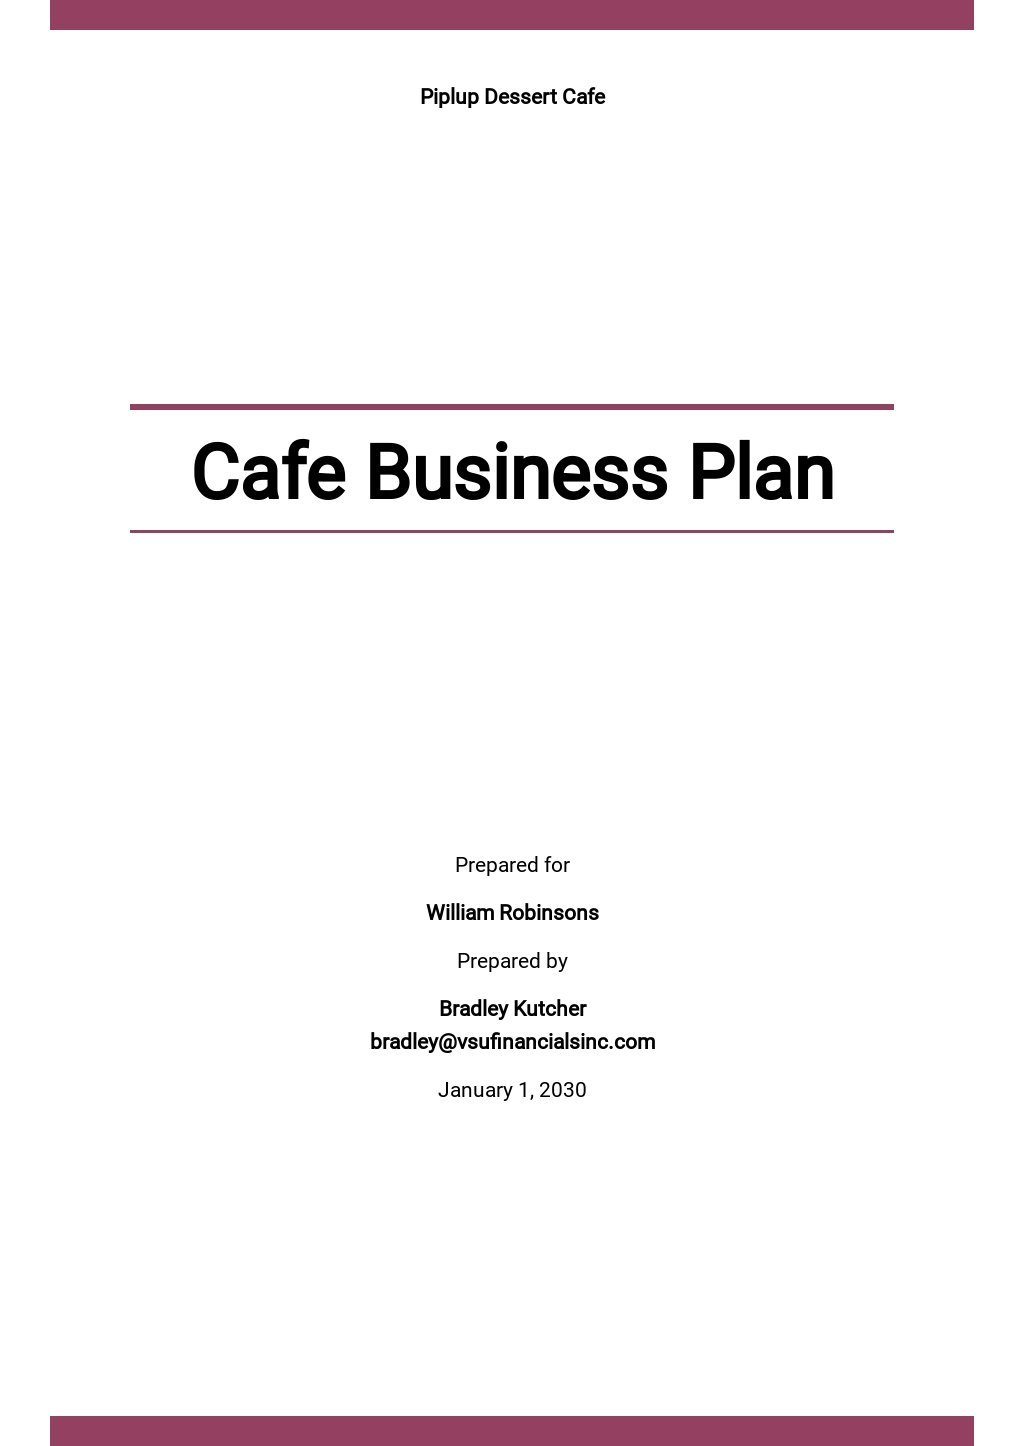 Cafe Business Plan Financial Template